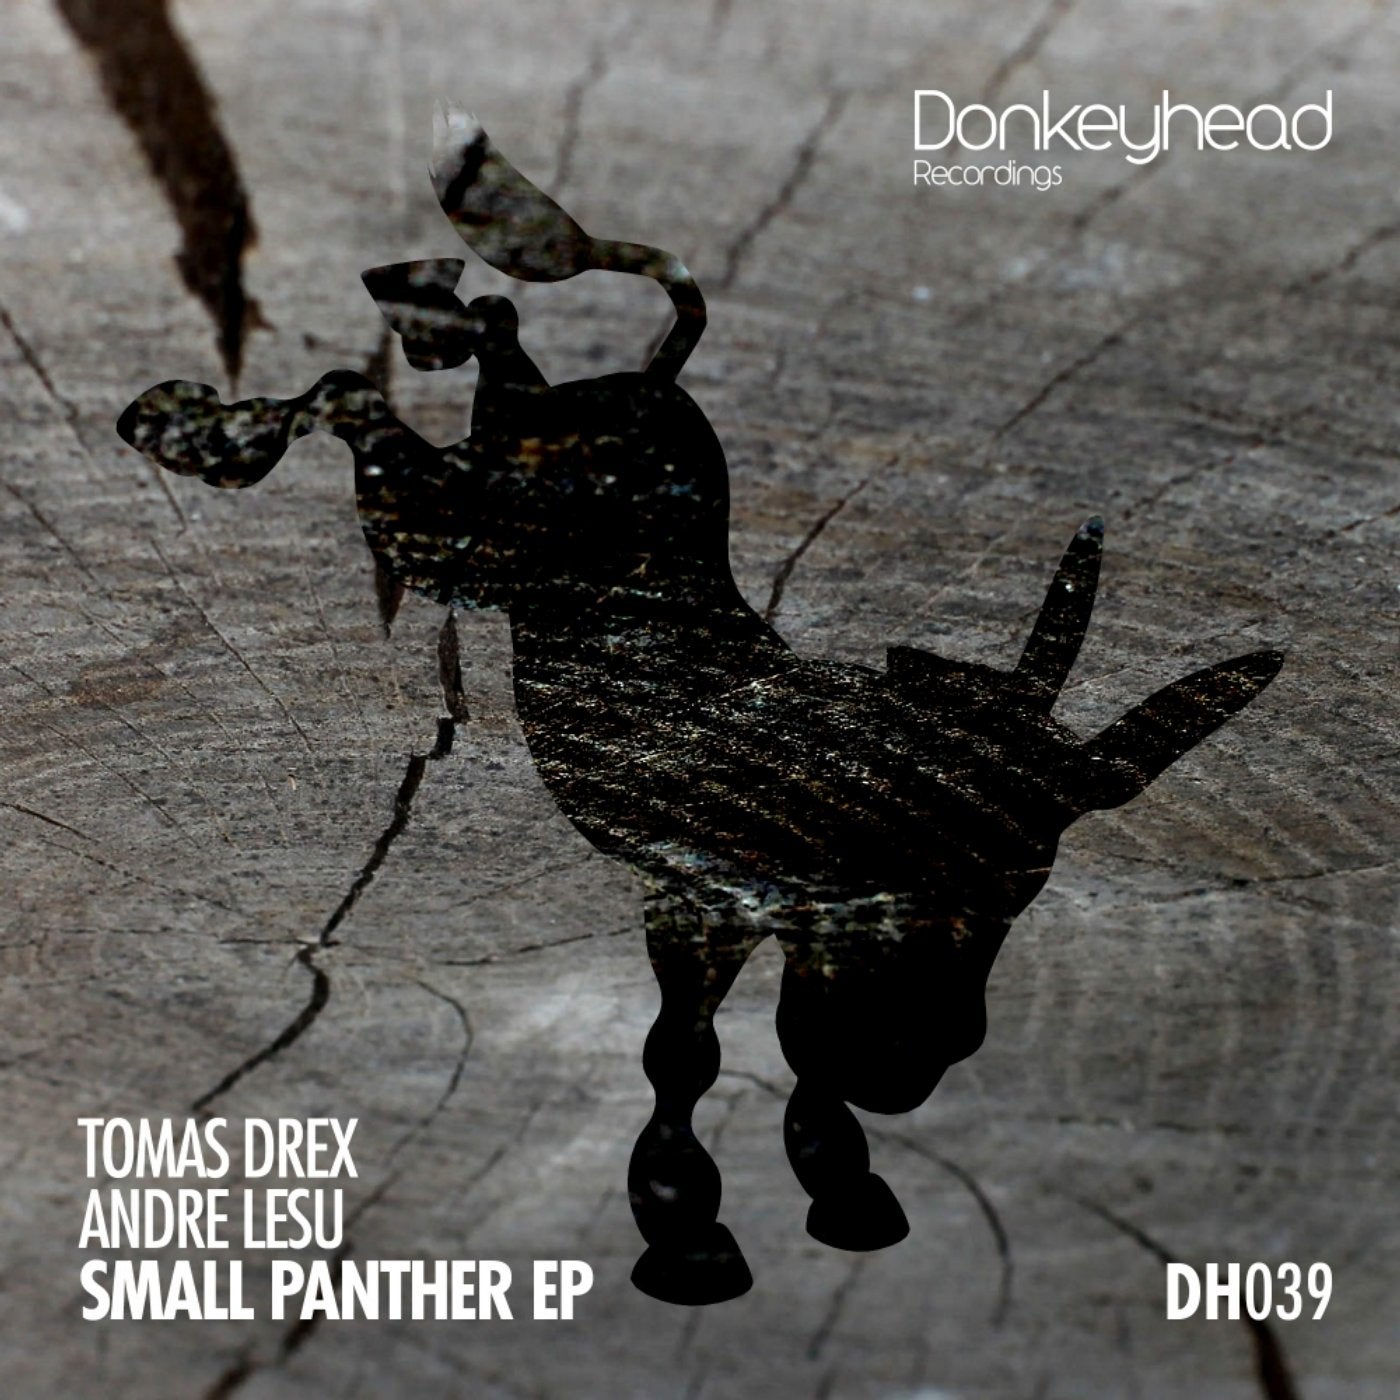 Small Panther EP